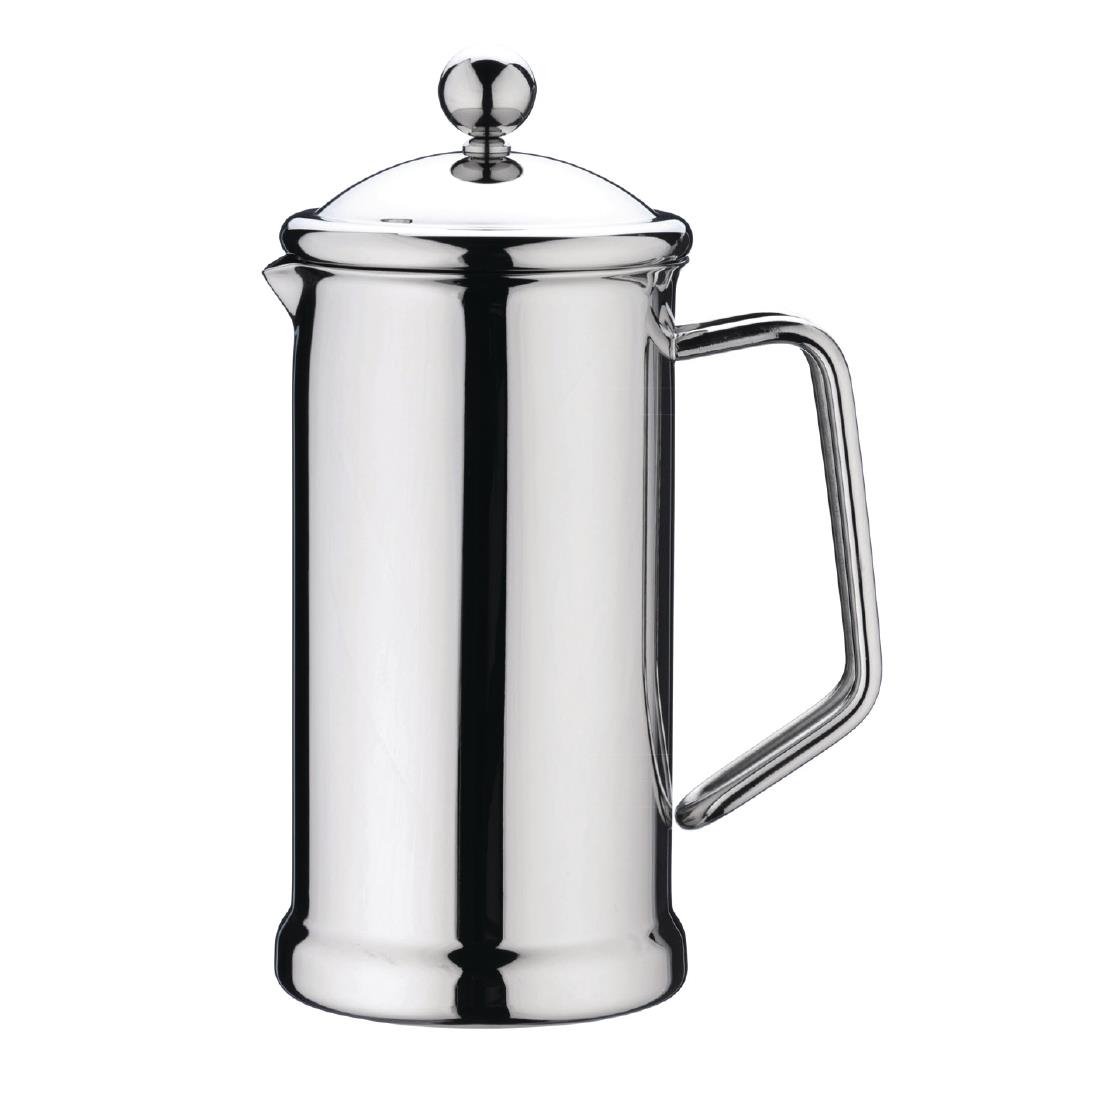 GL649 Polished Stainless Steel Cafetiere 8 Cup JD Catering Equipment Solutions Ltd